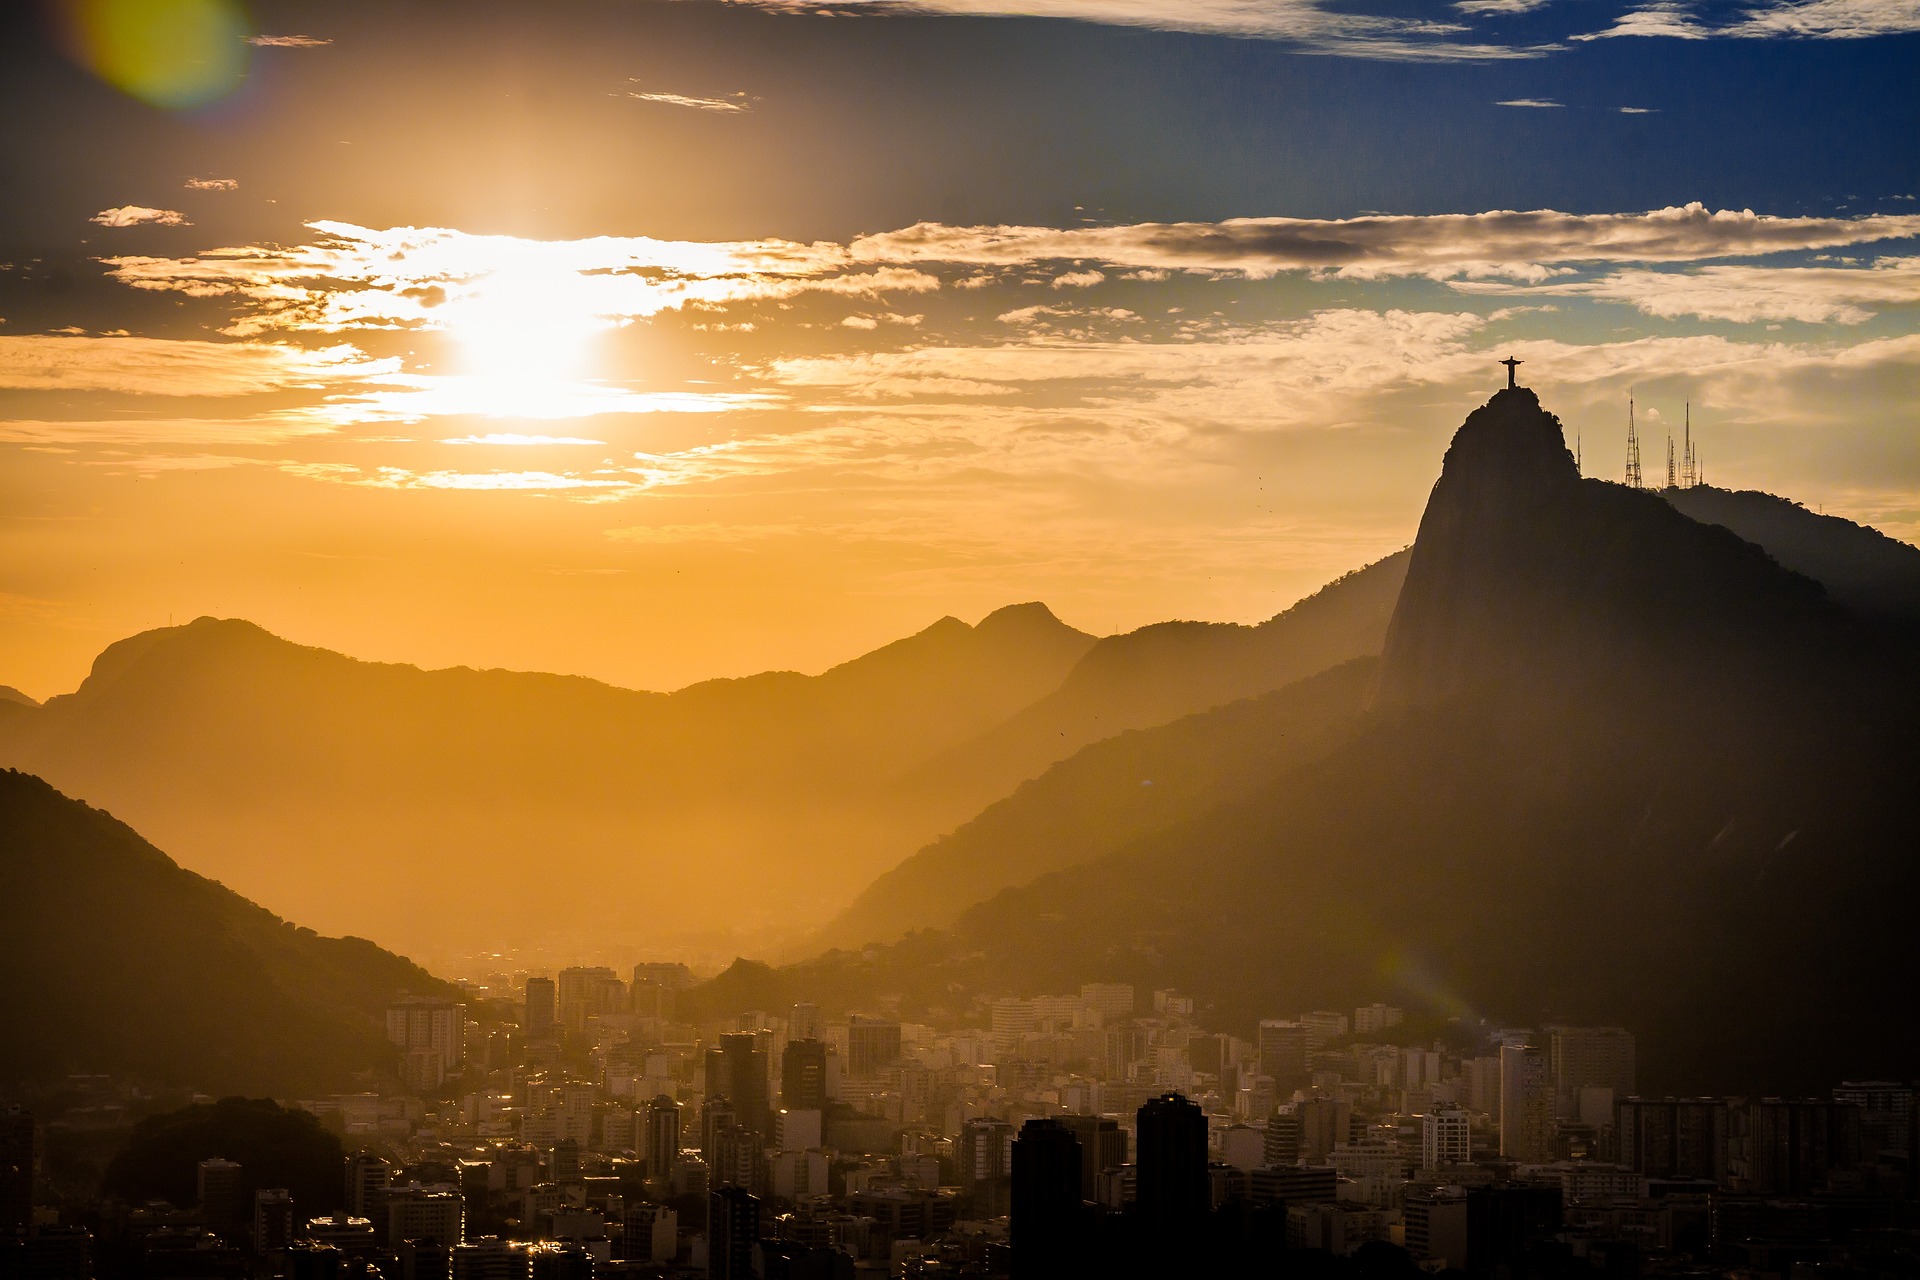 Experience the vibrant culture, stunning landmarks, and breathtaking views of Rio de Janeiro with a private tour that spans two unforgettable days.